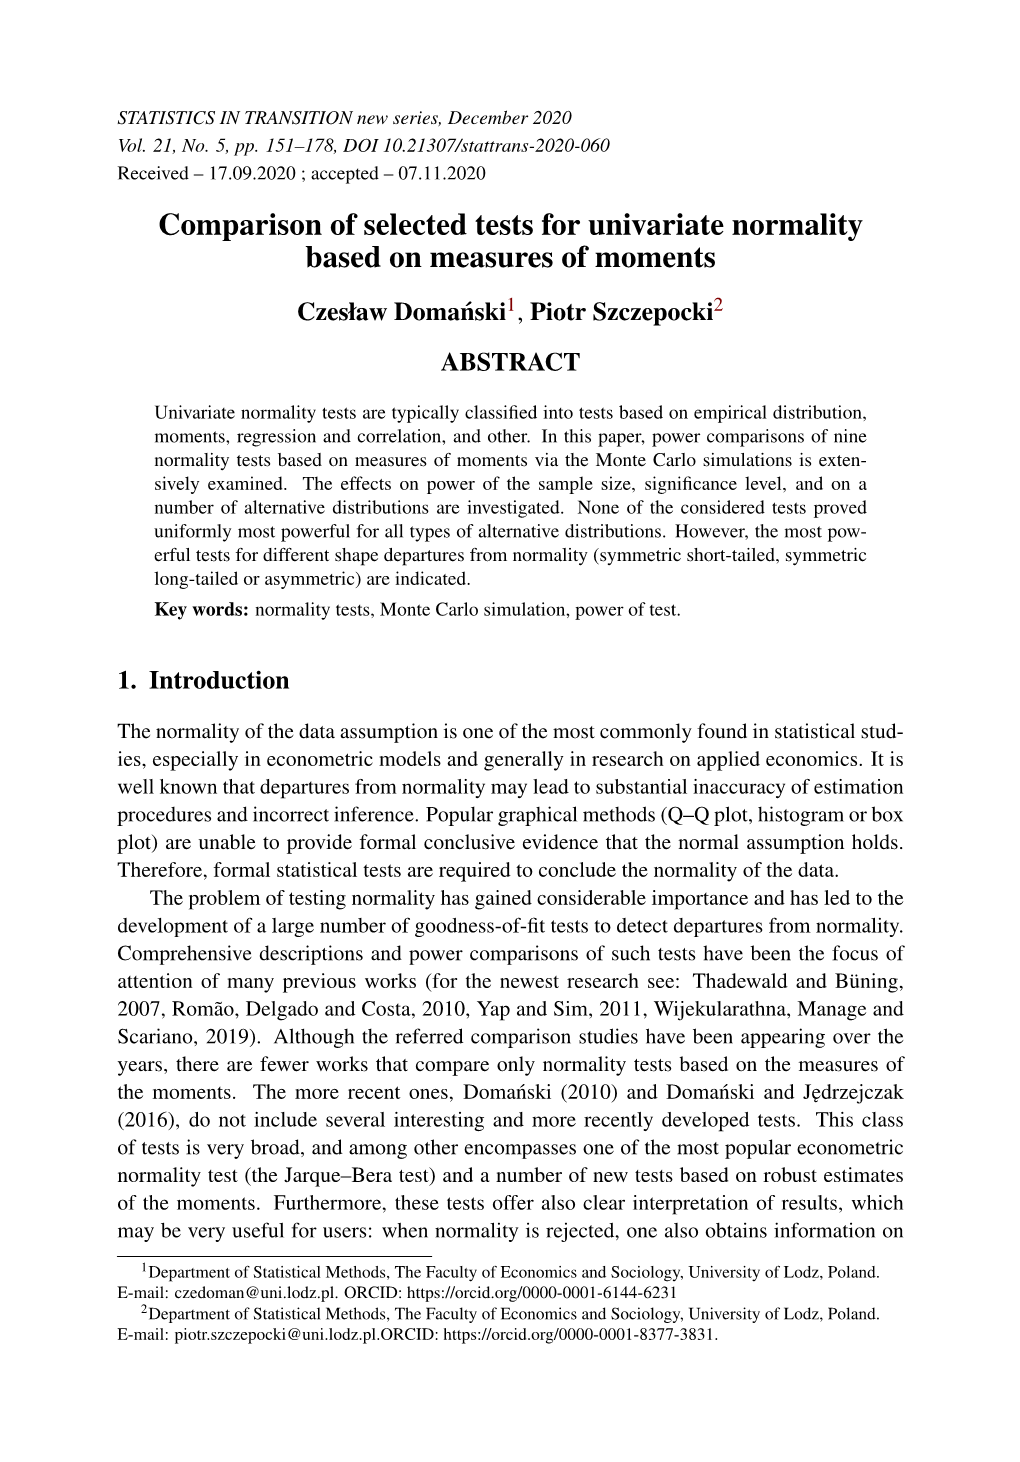 Comparison of Selected Tests for Univariate Normality Based on Measures of Moments